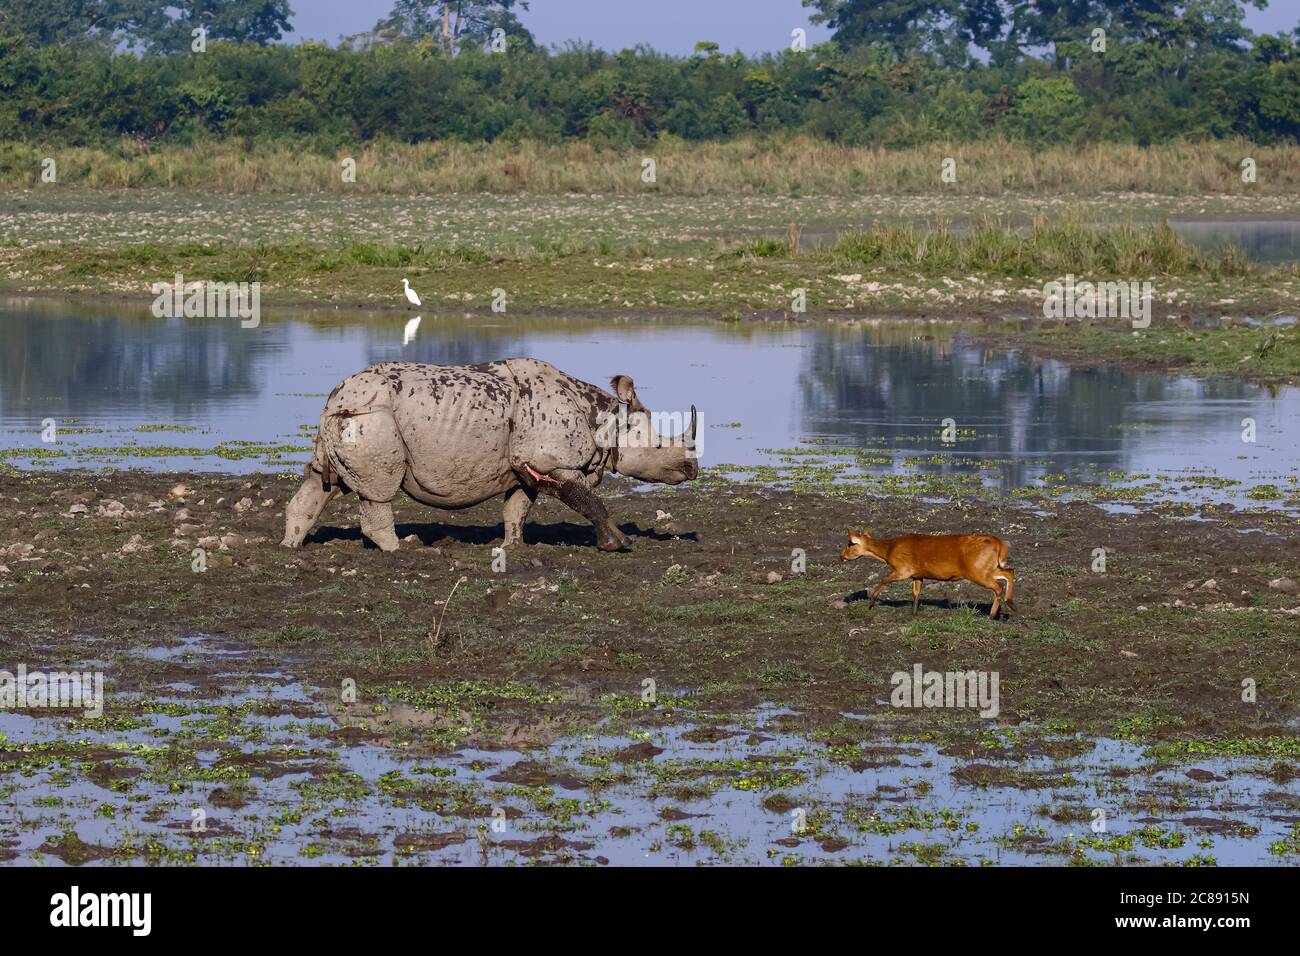 An image of a one horned rhino and a Hog deer standing facing each other in the grasslands in a national park in Assam India Stock Photo